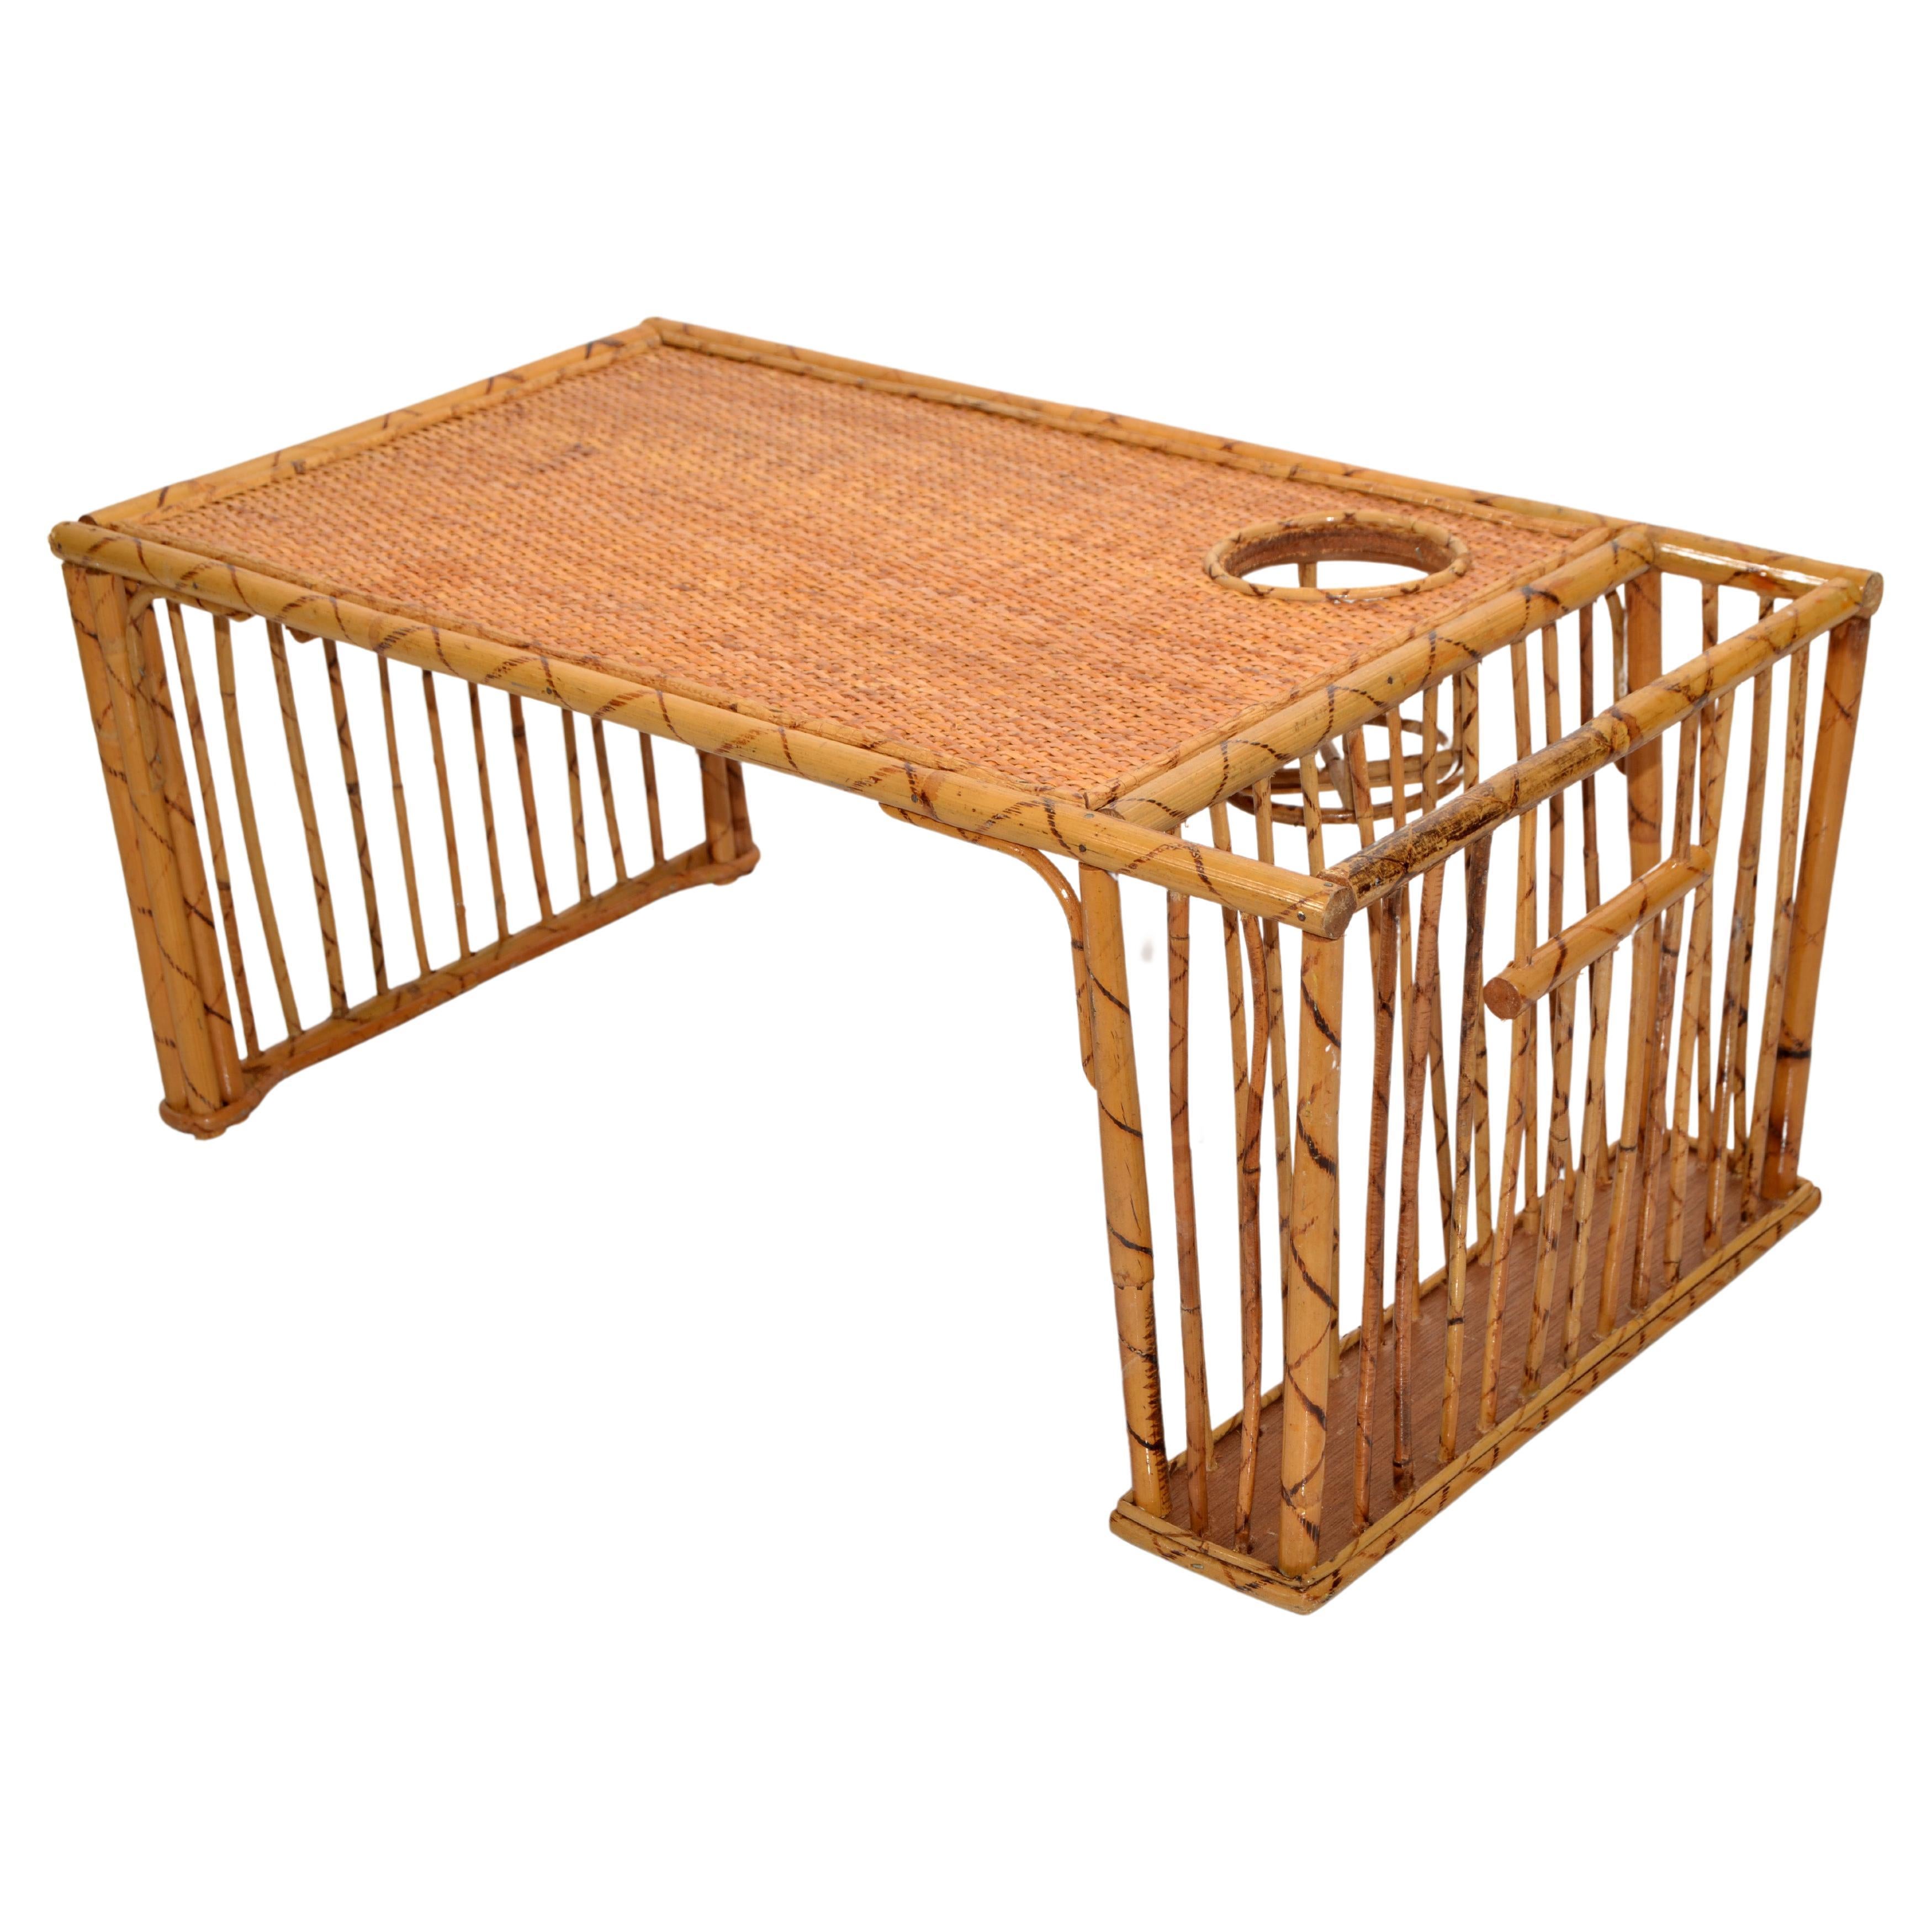 Bohemian Handwoven Reed Caning Bamboo Breakfast Bed Tray Table Cup Book Holder For Sale